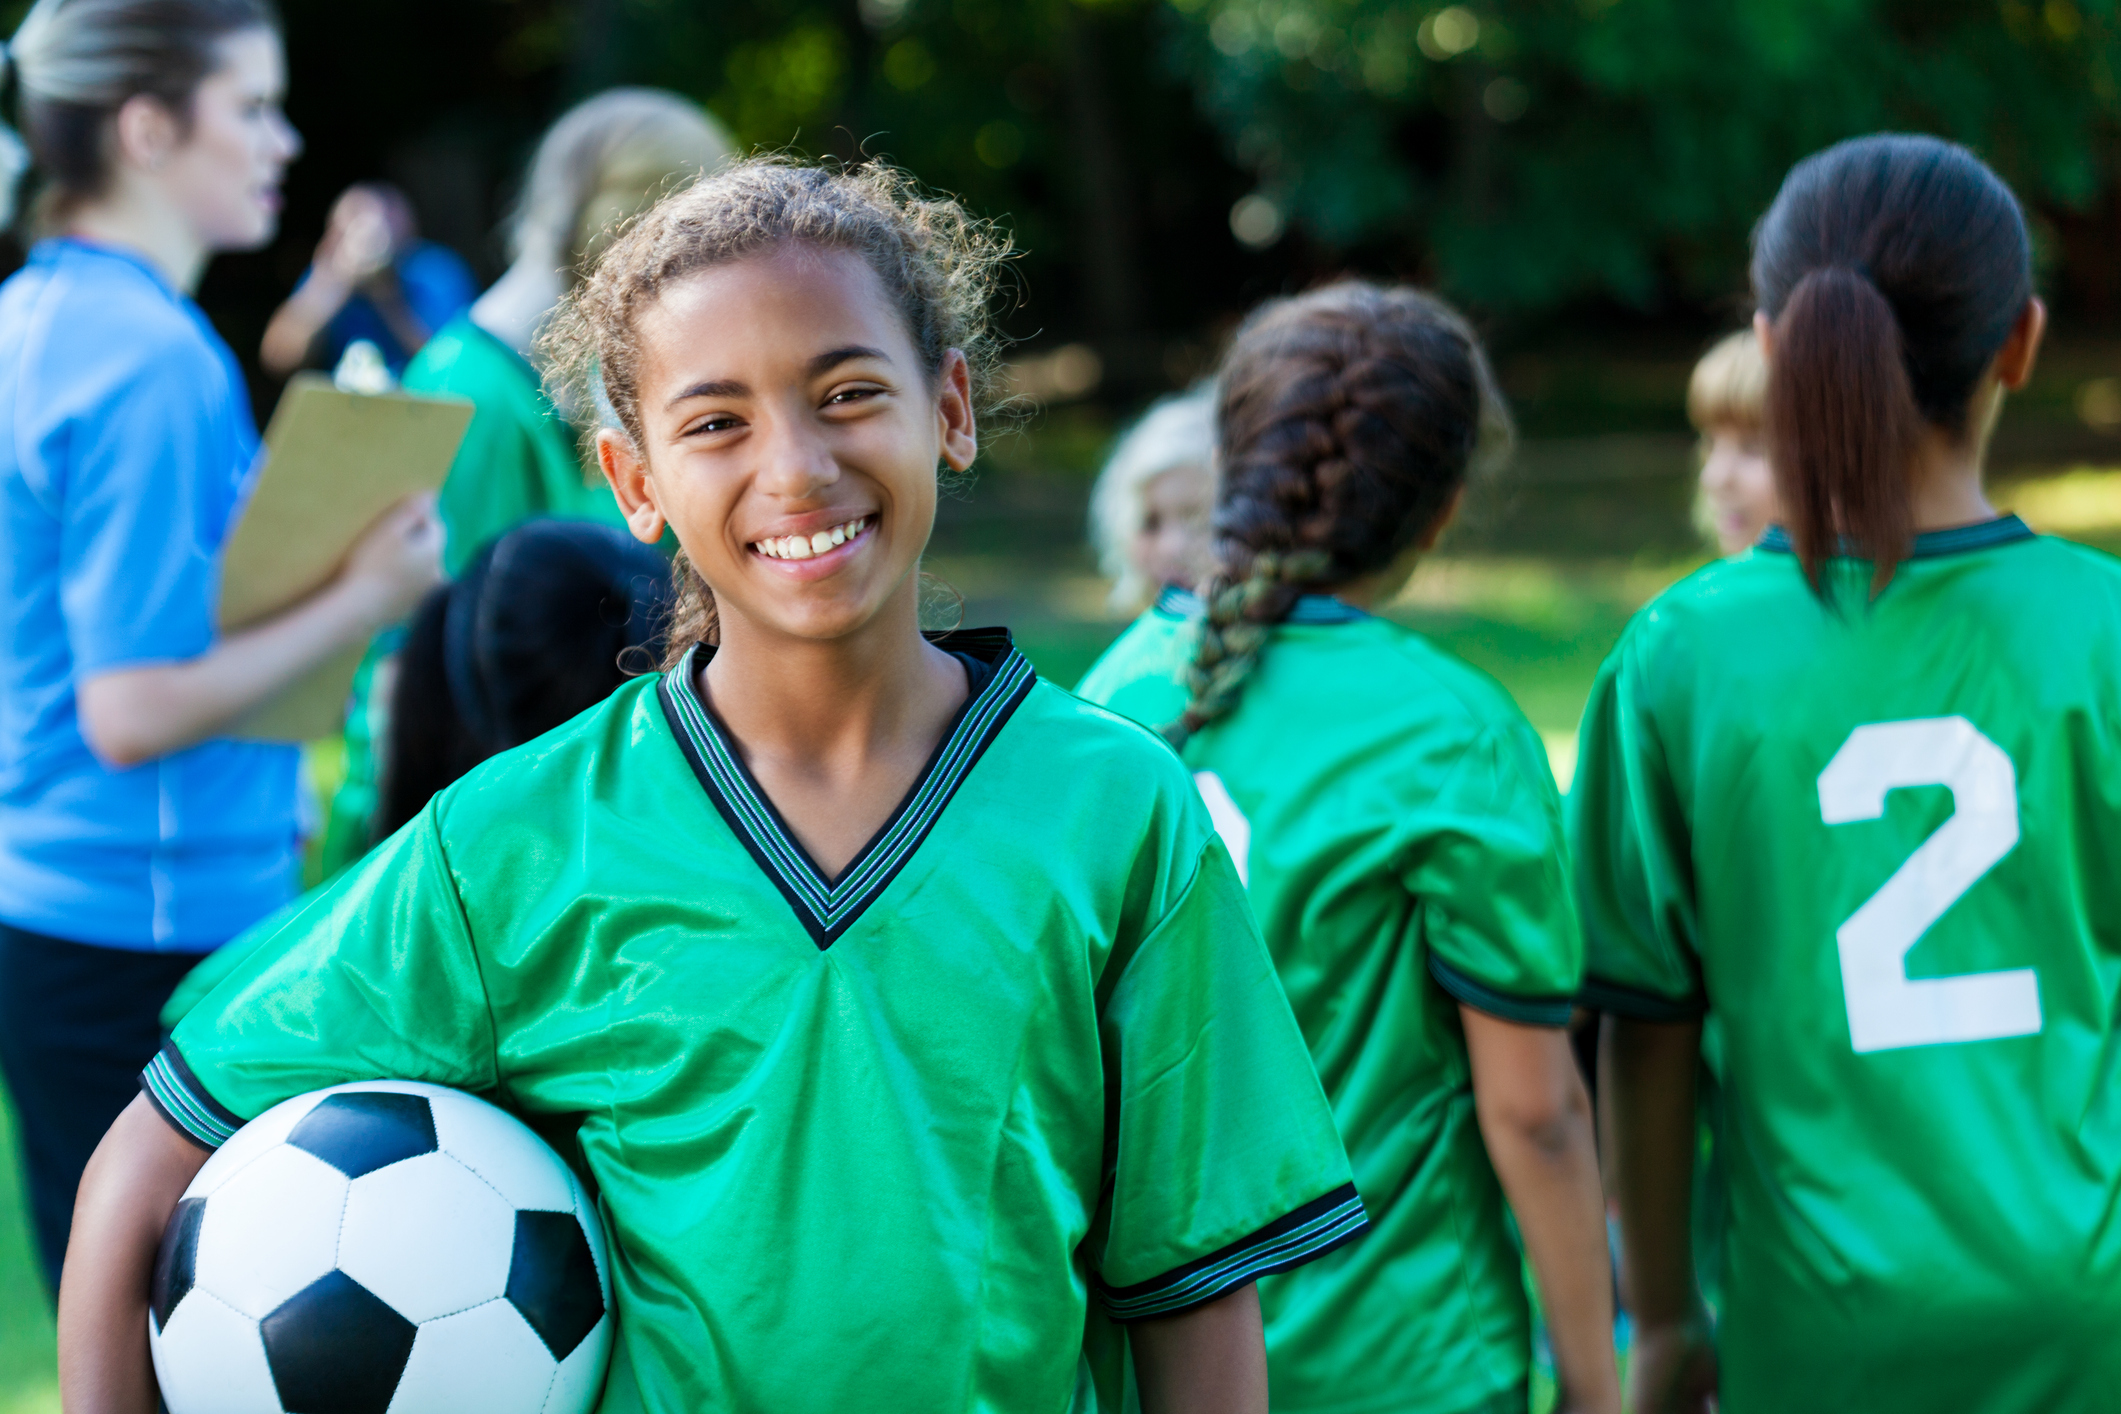 Pretty preteen soccer player smiles at the camera while holding a soccer ball. She is wearing a green jersey. Her team and coach are in the background.